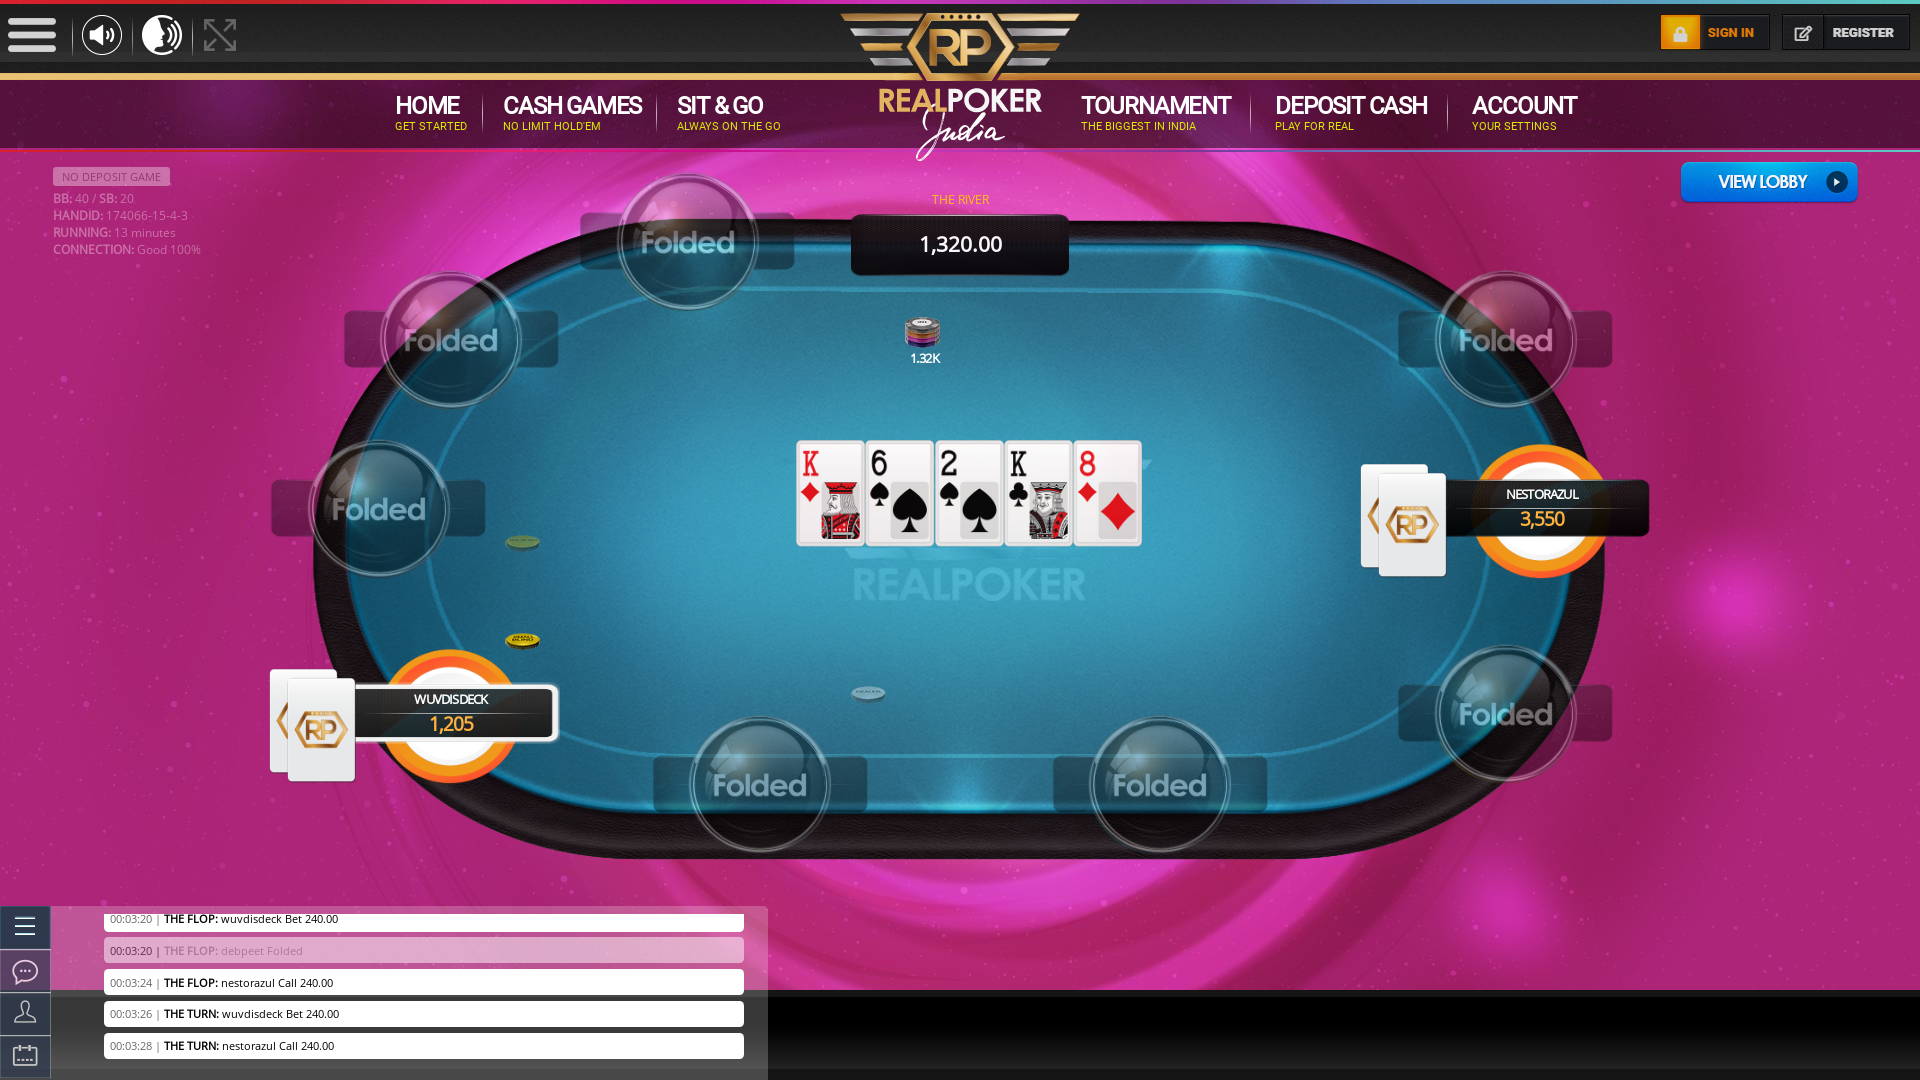 Real Indian poker on a 10 player table in the 13th minute of the game